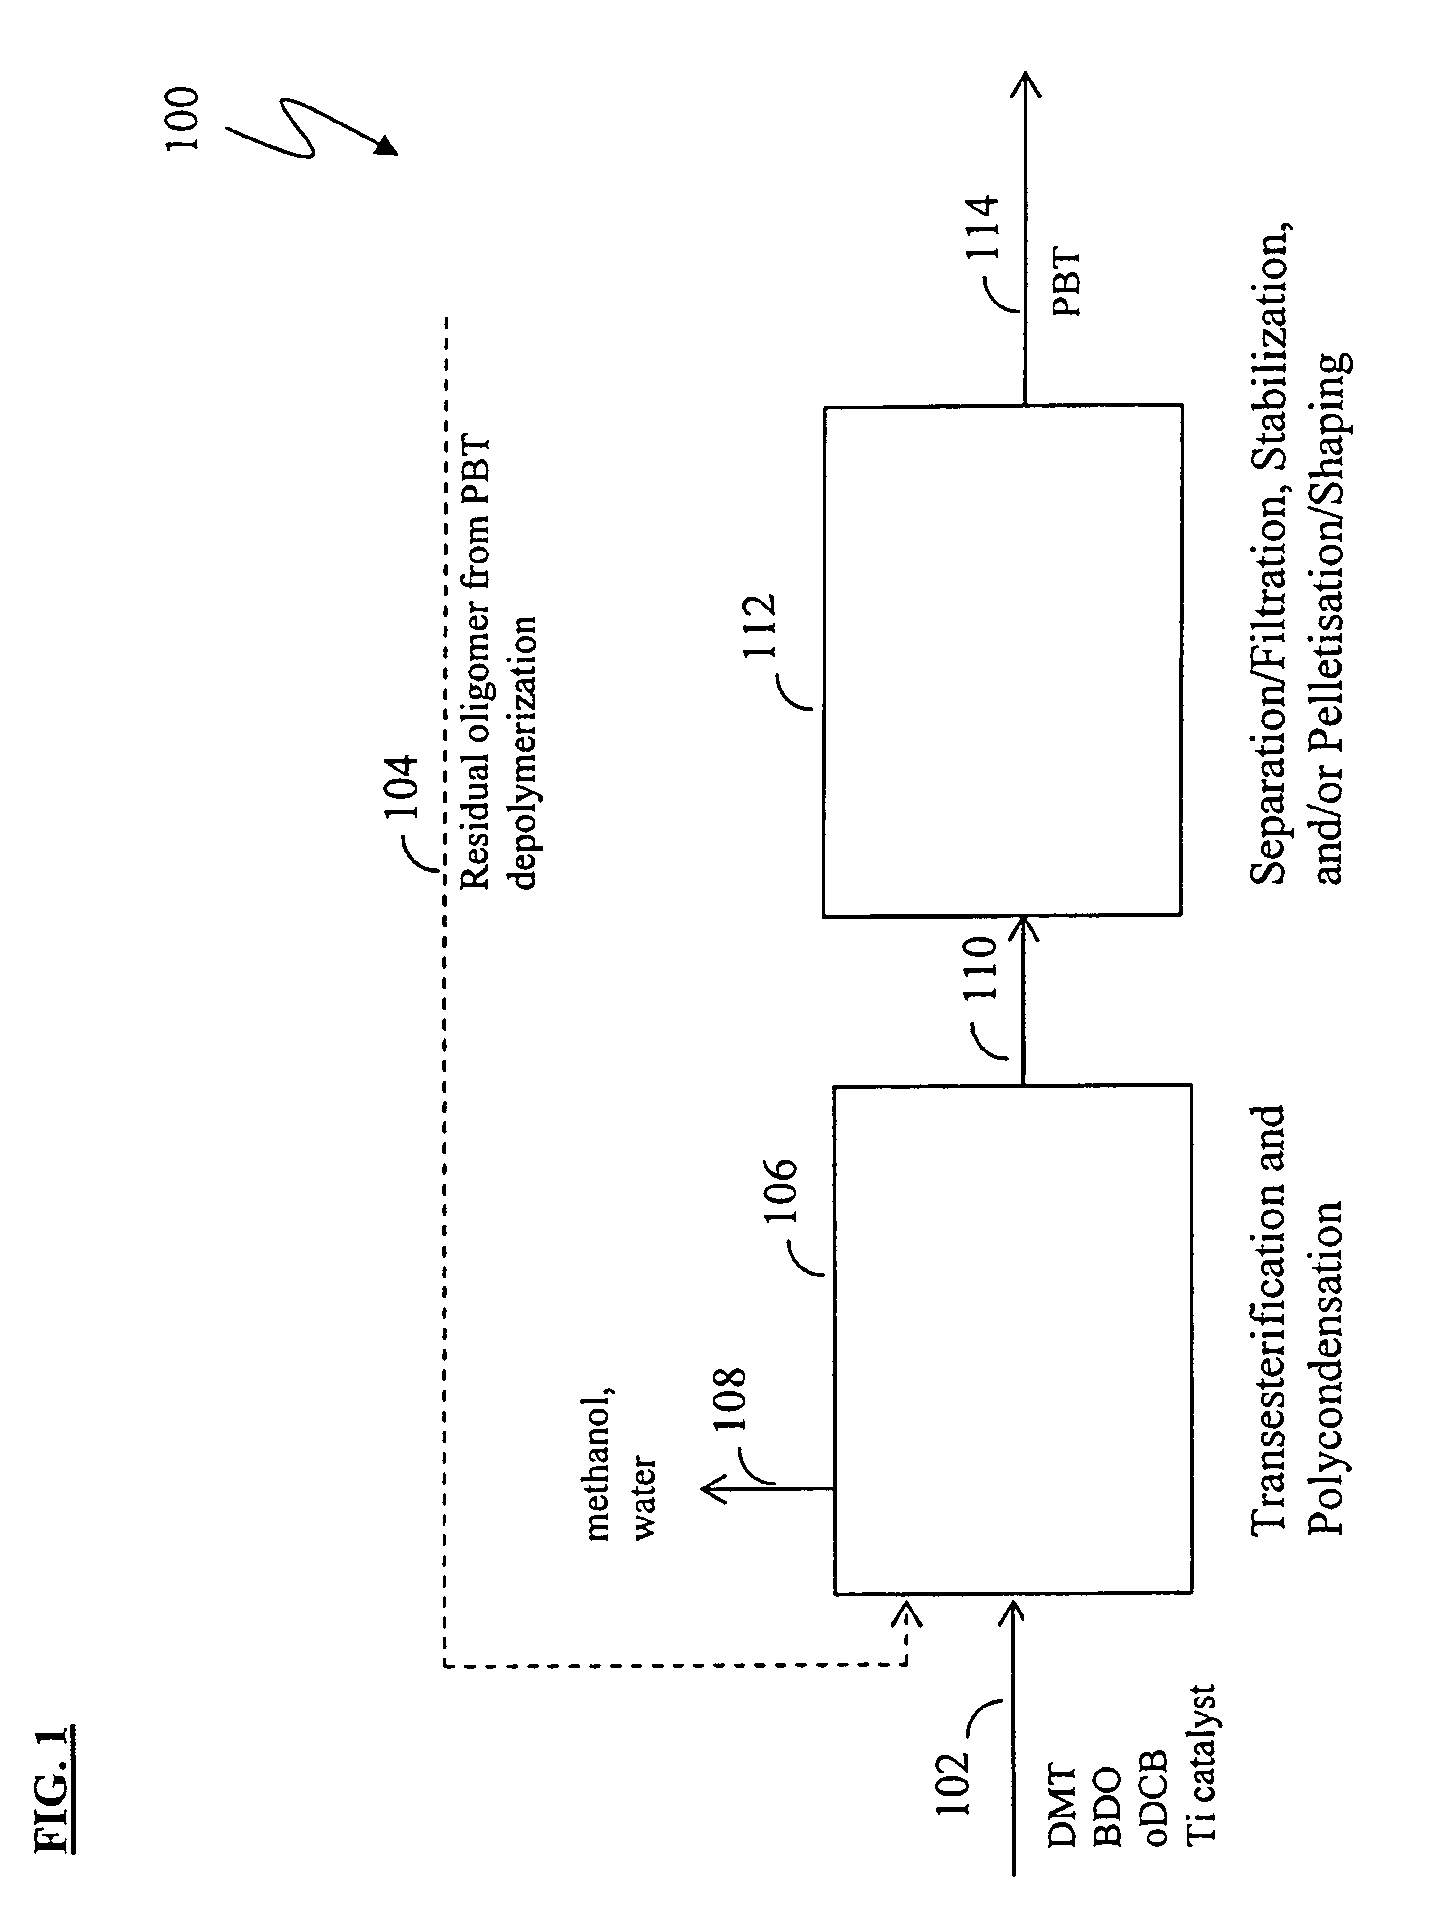 Methods for removing catalyst residue from a depolymerization process stream